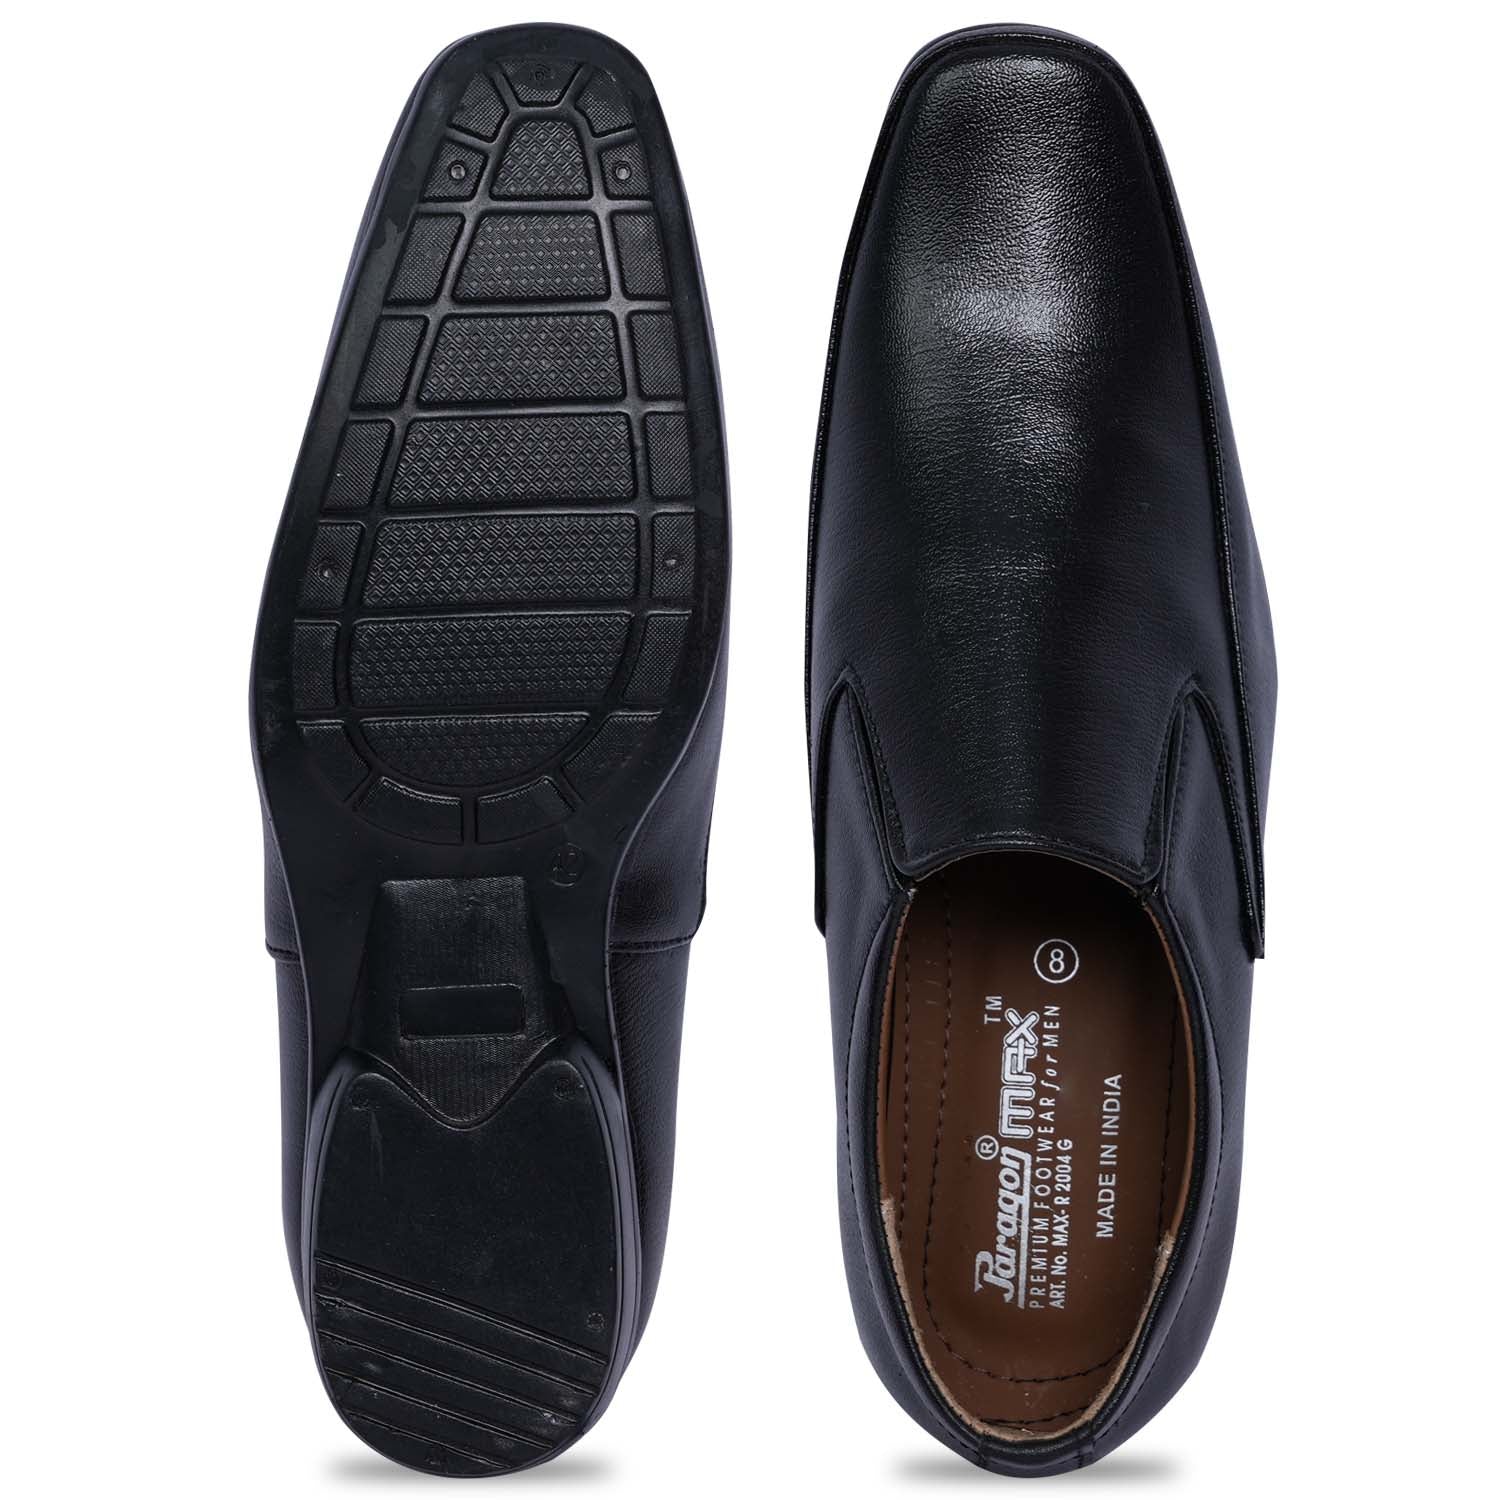 Paragon R2004G Men Formal Shoes | Corporate Office Shoes | Smart &amp; Sleek Design | Comfortable Sole with Cushioning | Daily &amp; Occasion Wear